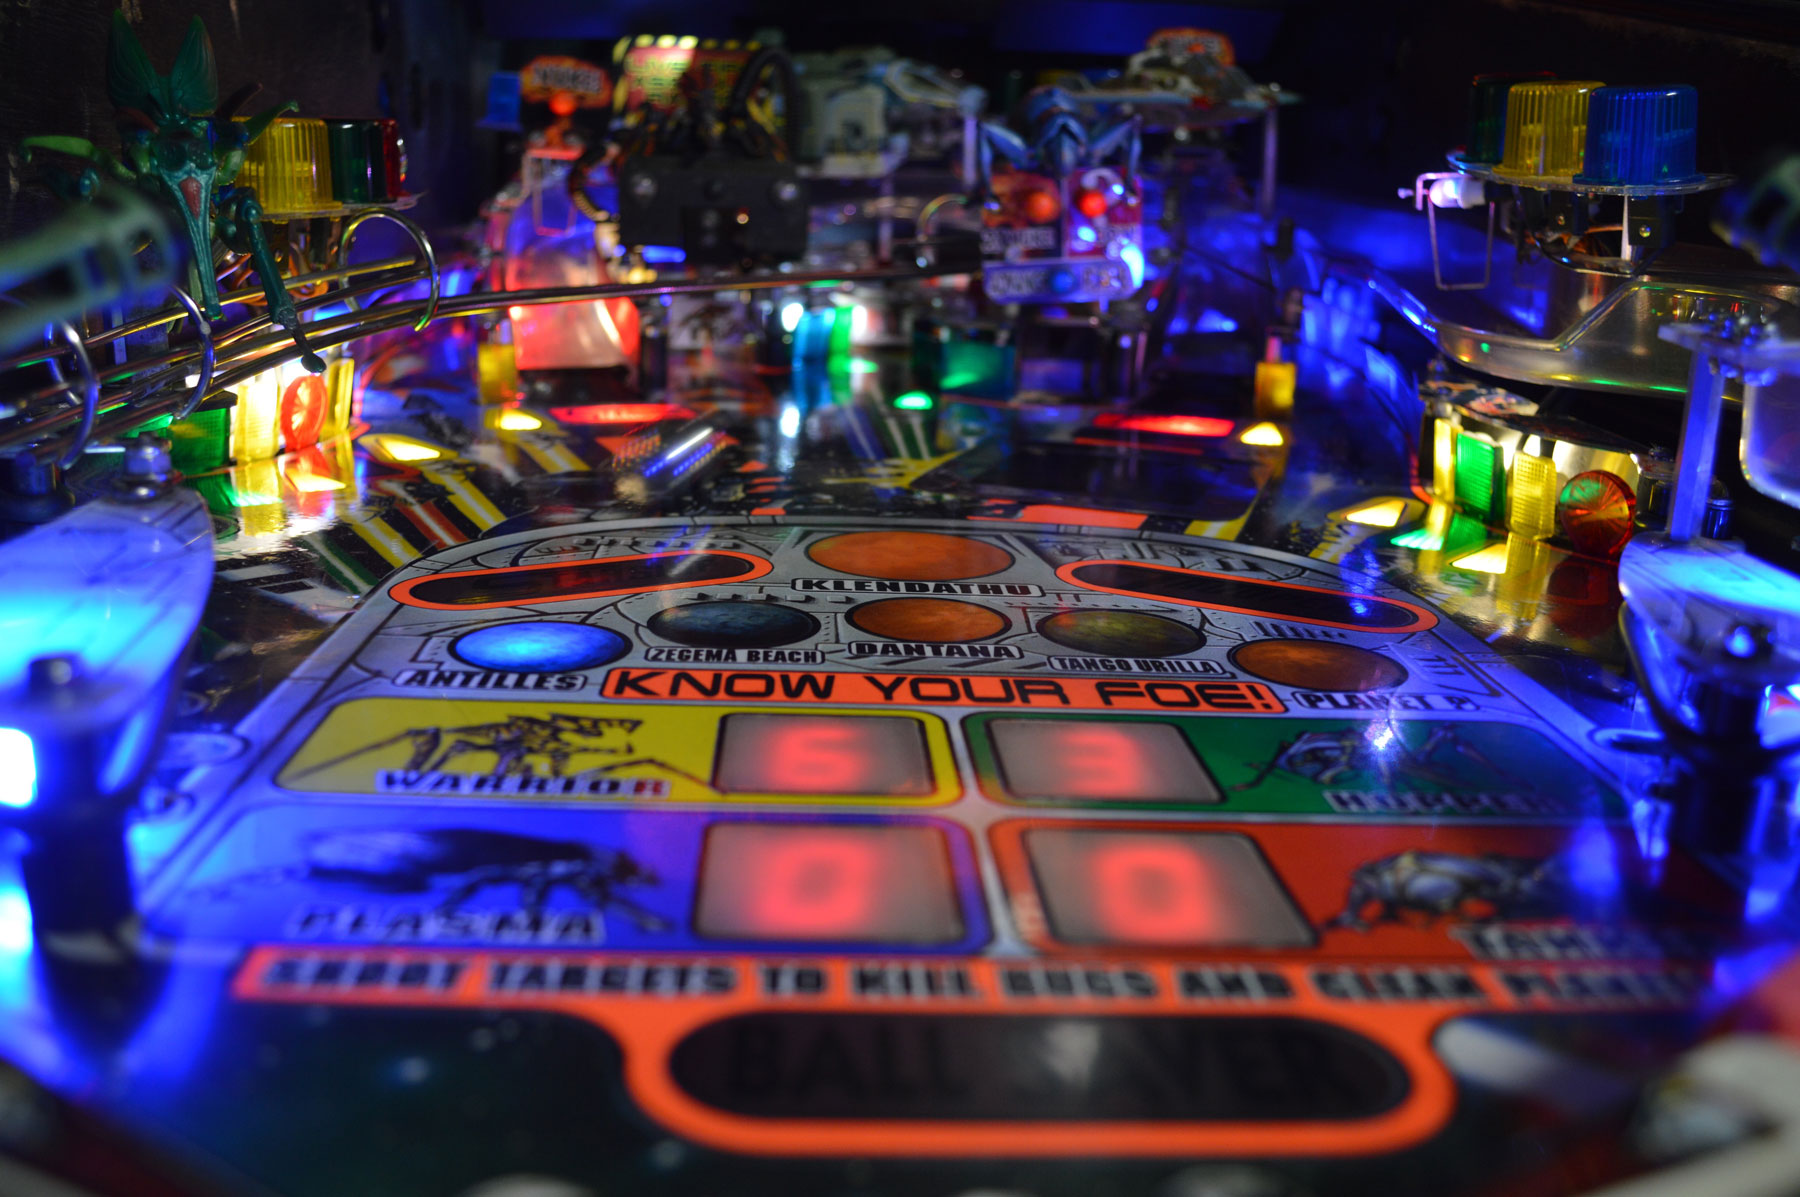 SST-playfield-with-ball-artistic